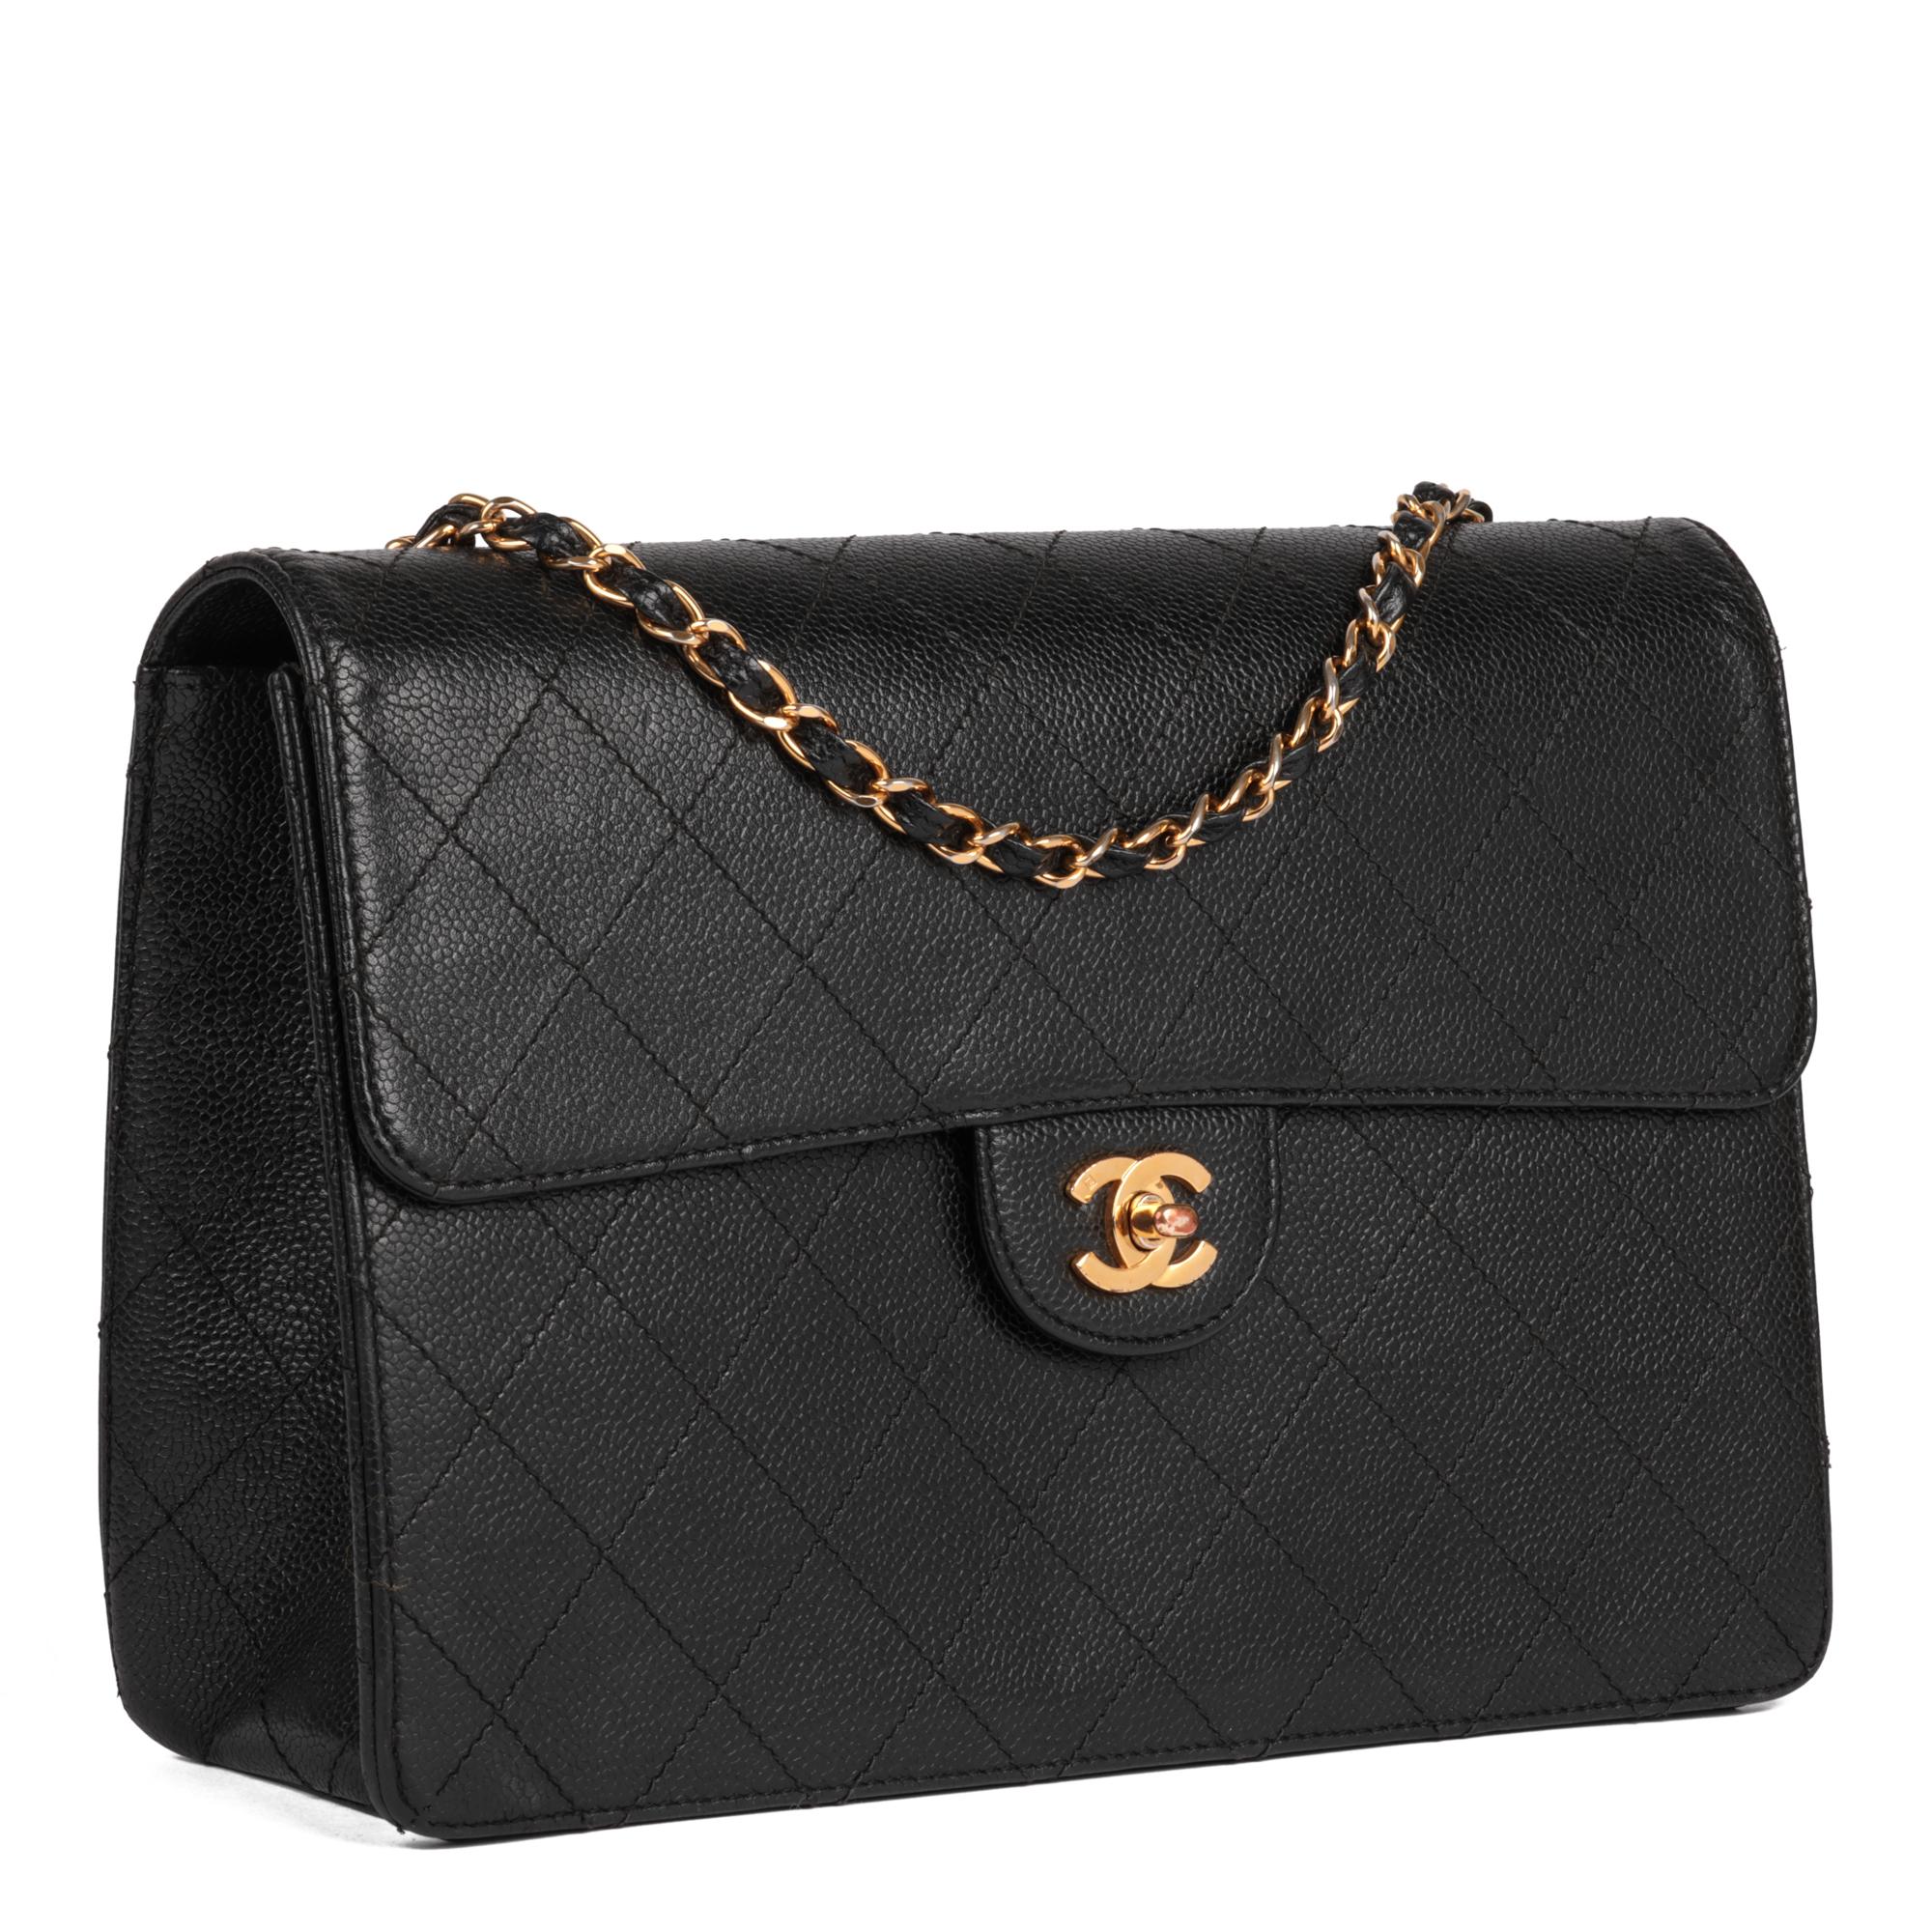 CHANEL
Black Quilted Caviar Leather Vintage Jumbo Classic Single Flap Bag

Xupes Reference: HB5149
Serial Number: 5108378
Age (Circa): 1997
Accompanied By: Chanel Dust Bag
Authenticity Details: Serial Sticker (Made in France)
Gender: Ladies
Type: